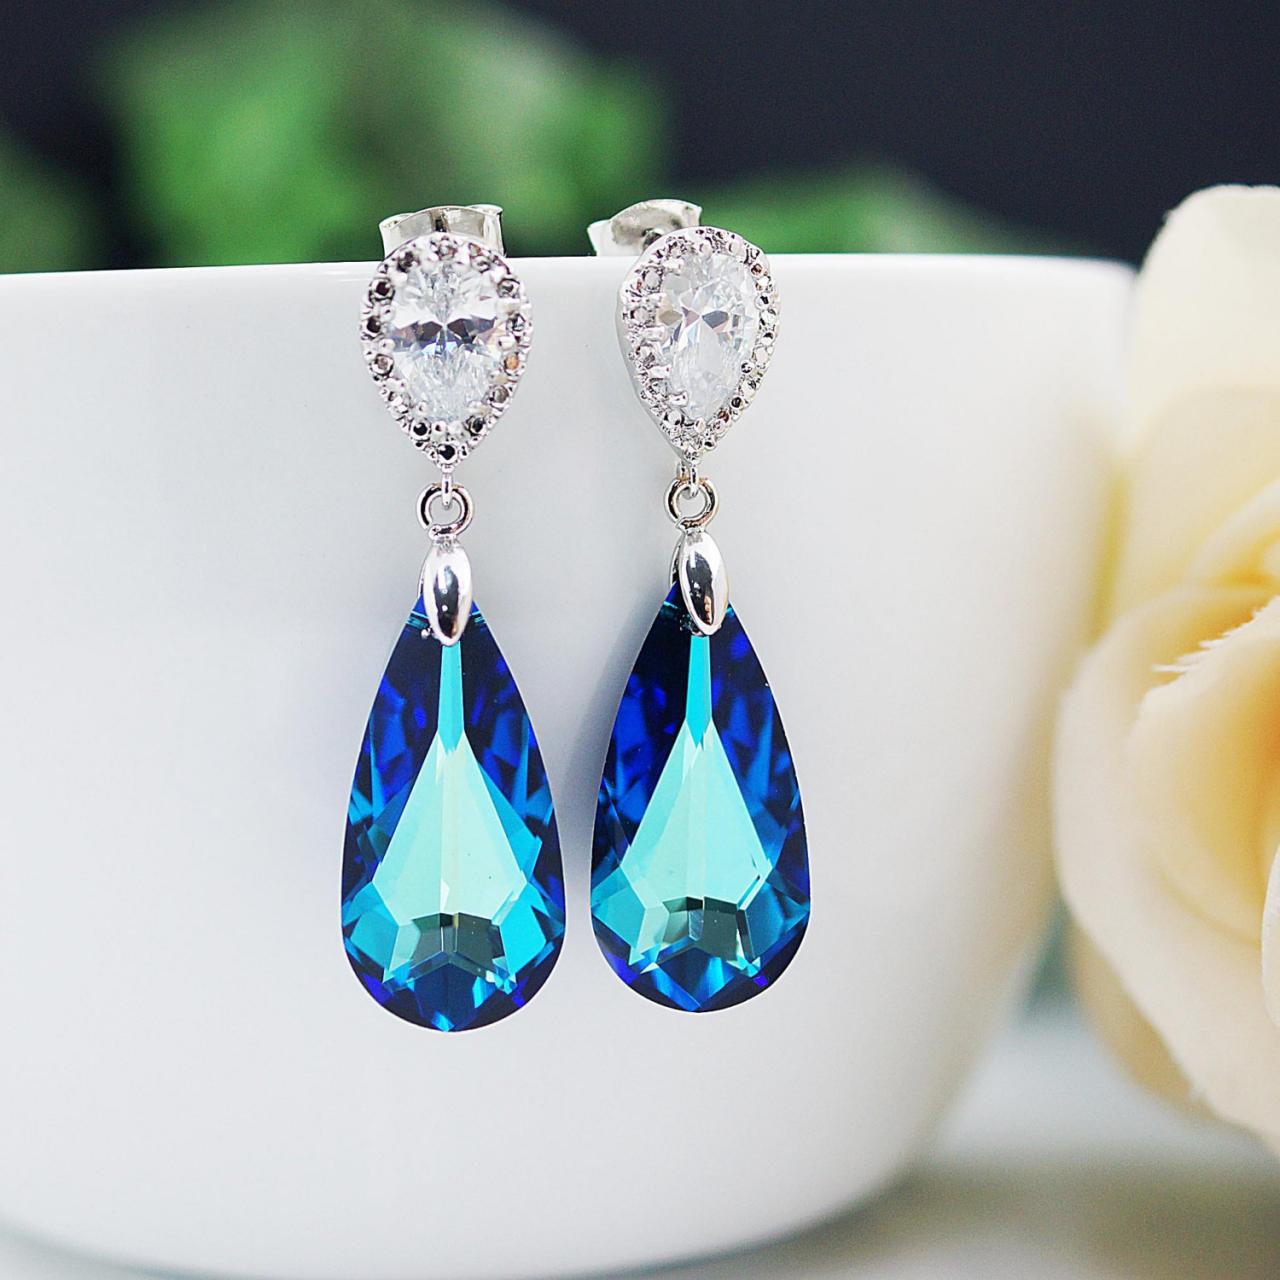 Bridal Earrings Matte Rodium Plated Cubic Zirconia Ear Posts With Large Bermuda Blue Swarovski Crystal Drops